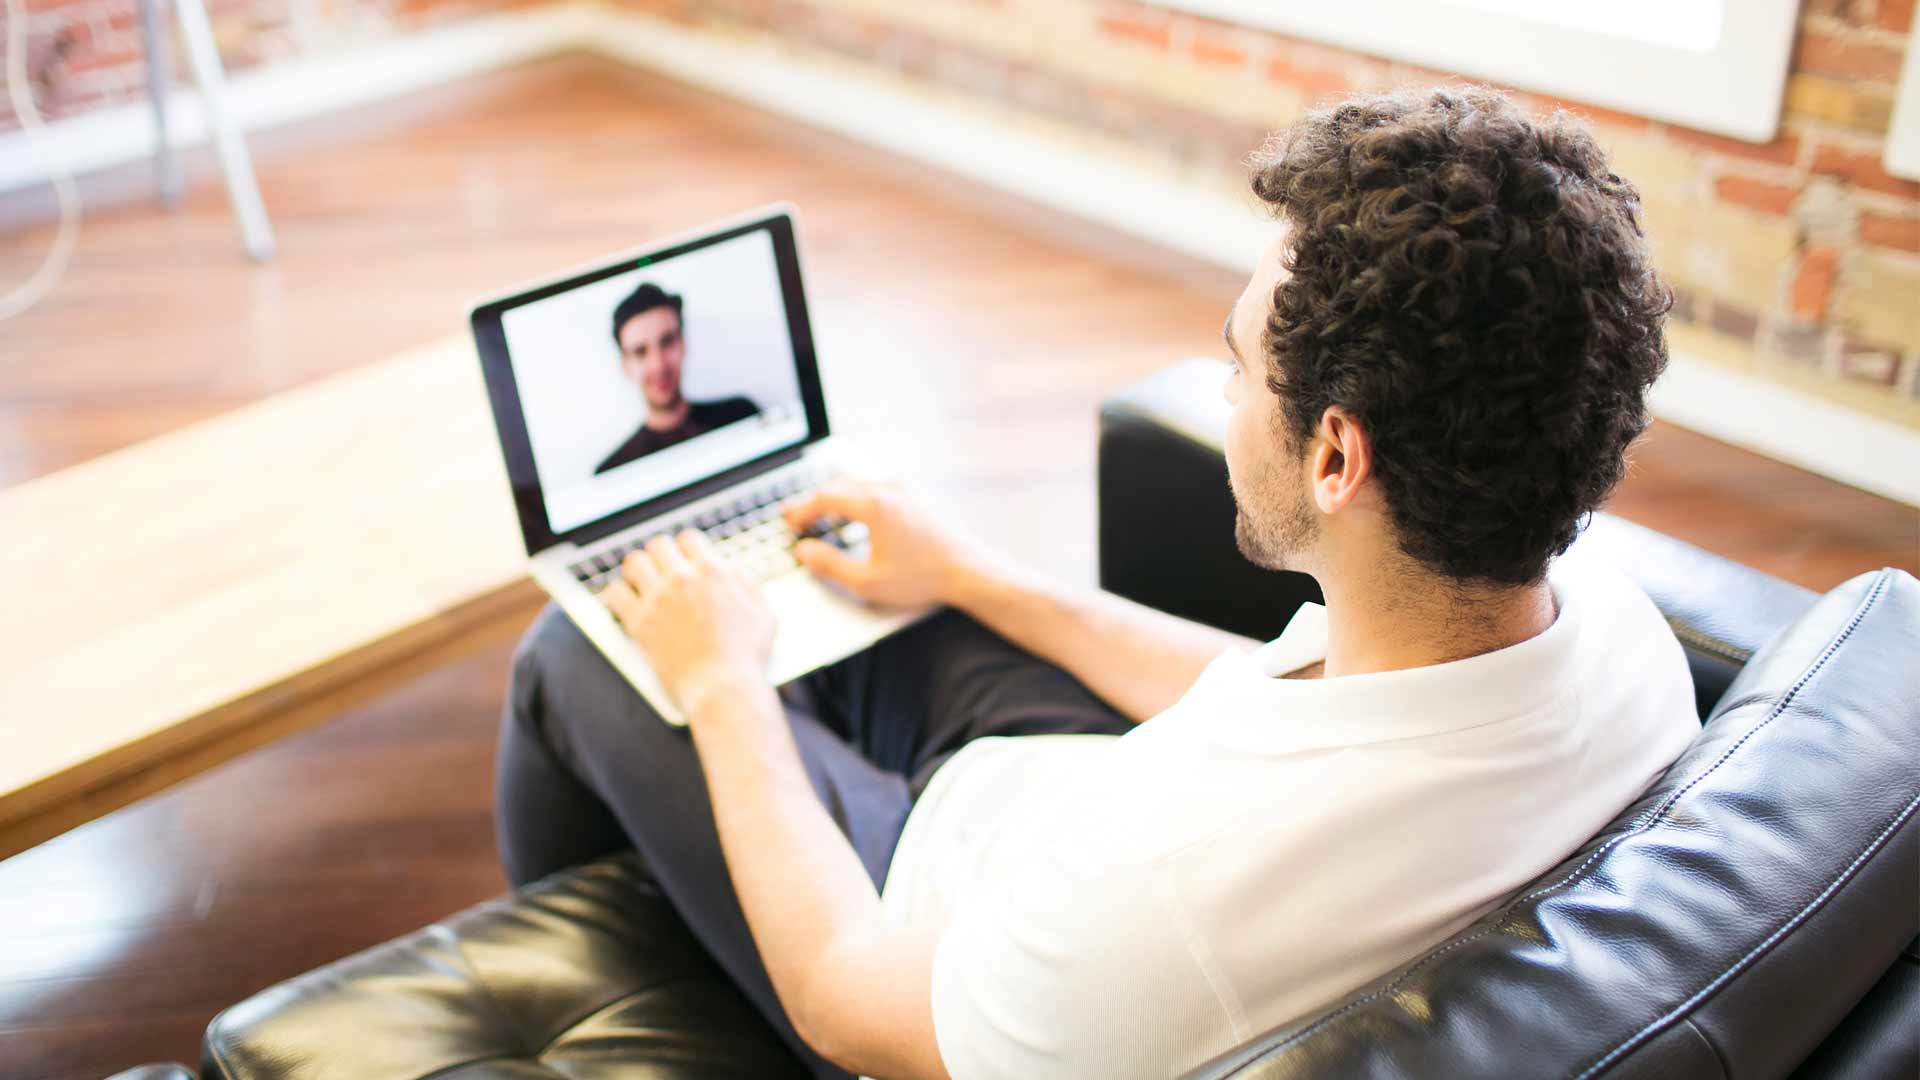 Video conferencing is a great resource for businesses during the Covid-19 outbreak.